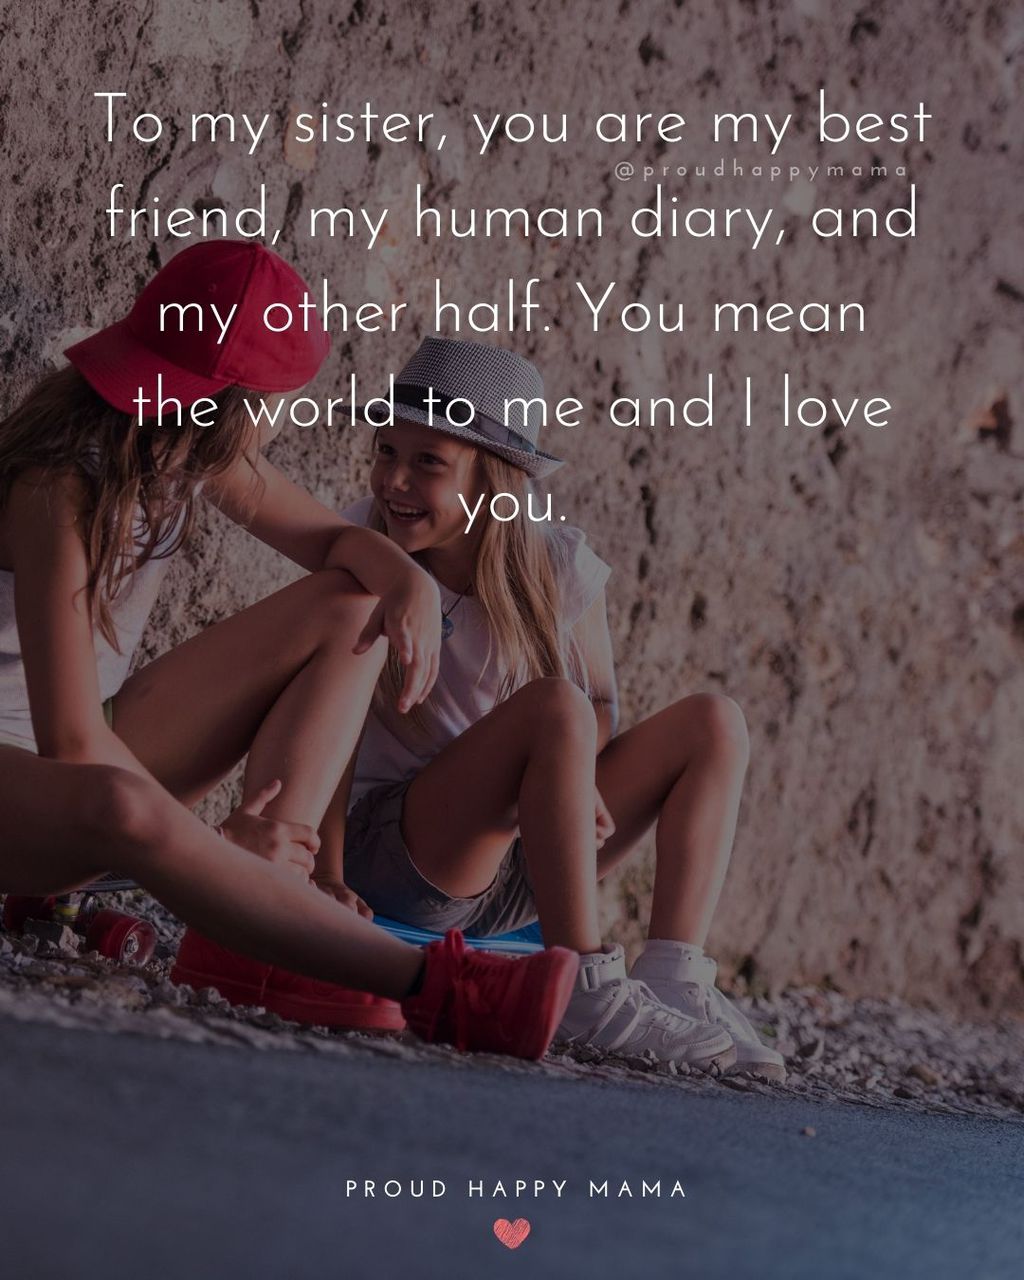 Sister Quotes - To my sister, you are my best friend, my human diary, and my other half. You mean the world to me and I love you.